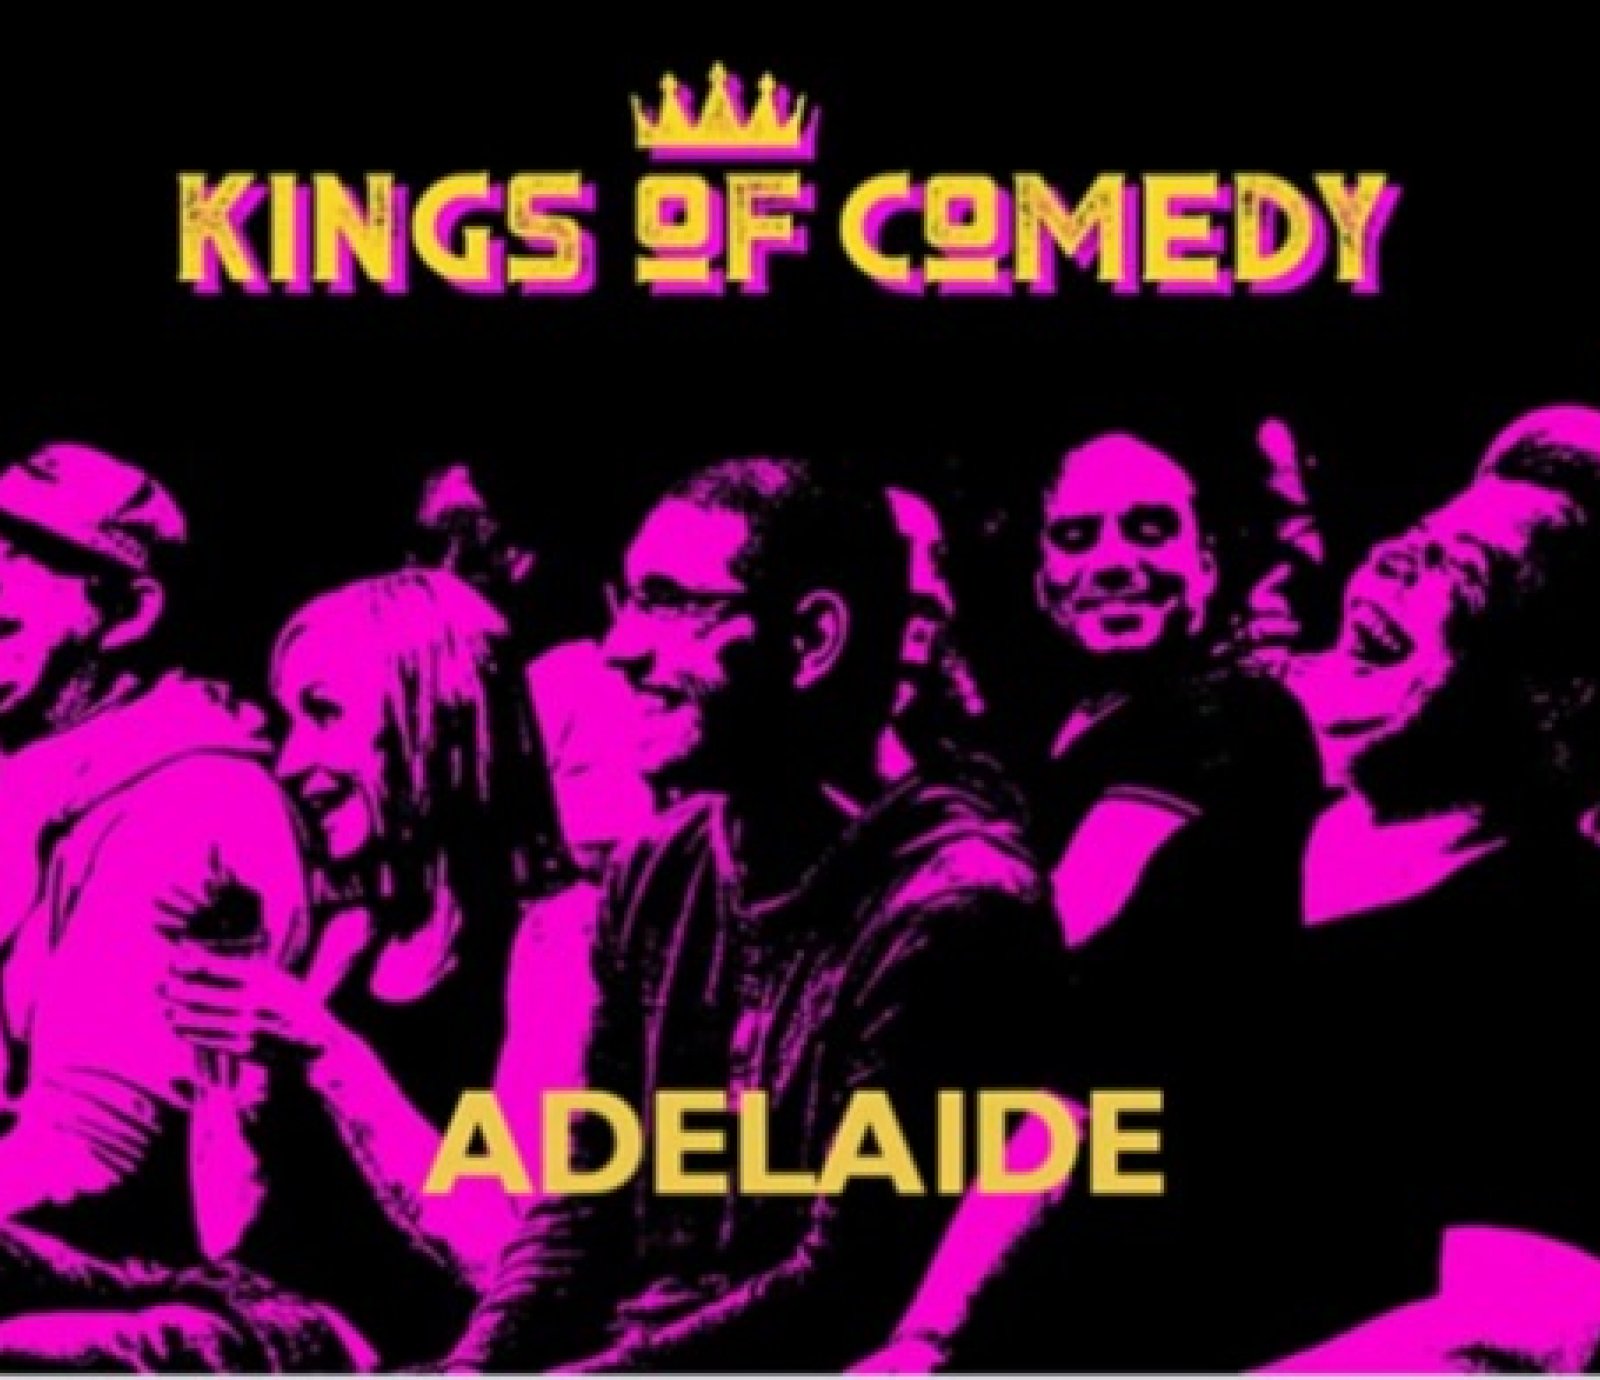 Kings of Comedy's Adelaide